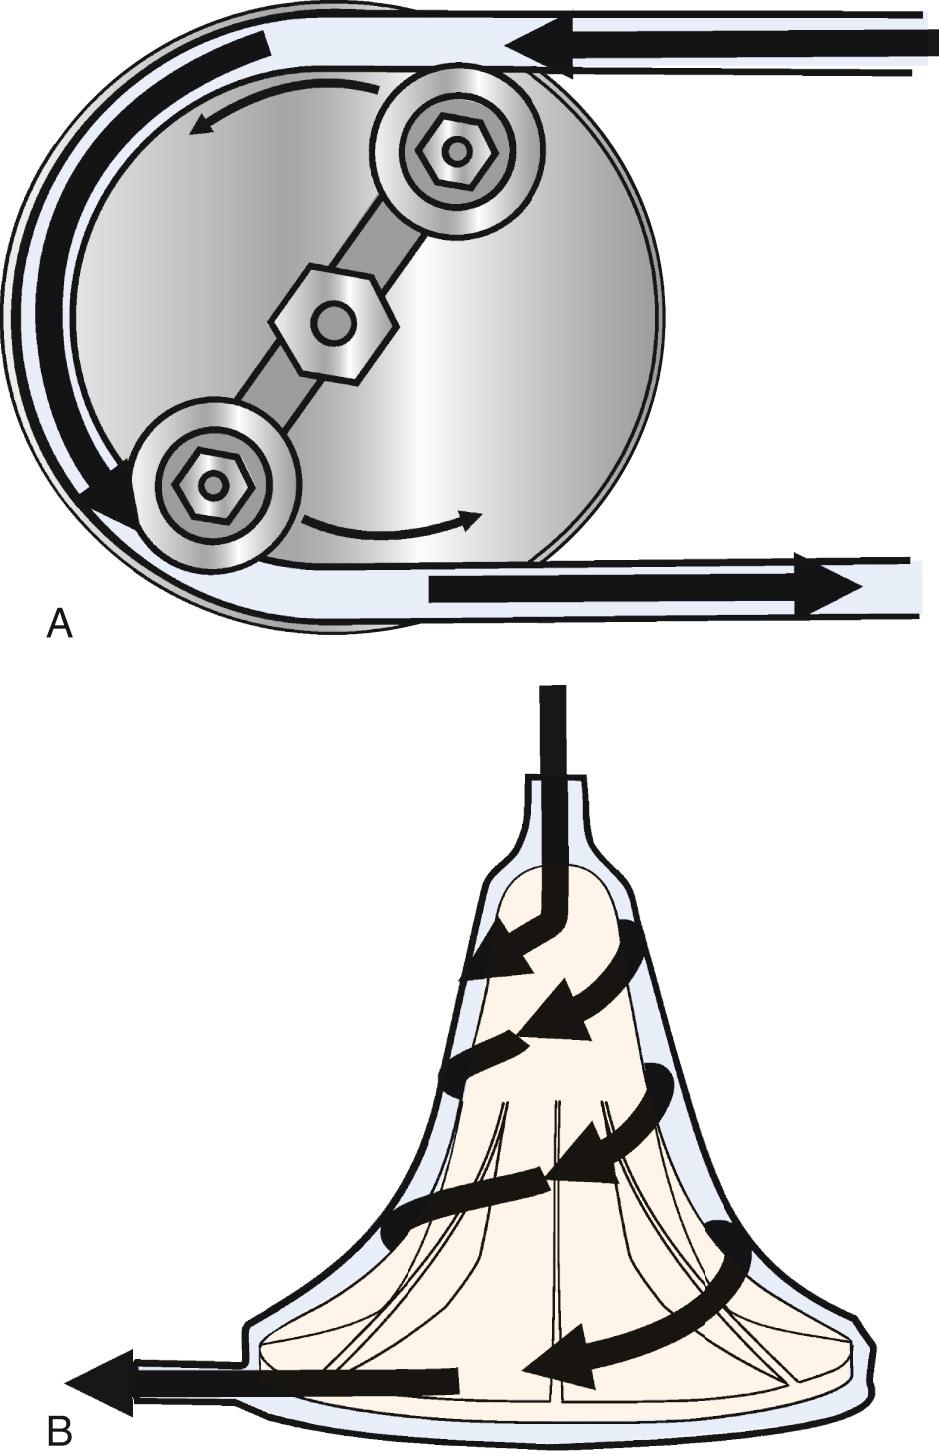 FIGURE 63-7, A, A double roller pump has rotating arms oriented at 180 degrees like spokes on a wheel. Spool-shaped rollers are located at the ends of the arms. A length of tubing is locked inside a curved track at the outer circumference of a partial circle of 210 degrees. B, A typical centrifugal pump has a cone-shaped outer housing with an upper inlet and a single lower outlet. The inner chamber contains spinning concentric smooth cones or fins, mounted on a central impeller. Arrows indicate direction of blood flow.